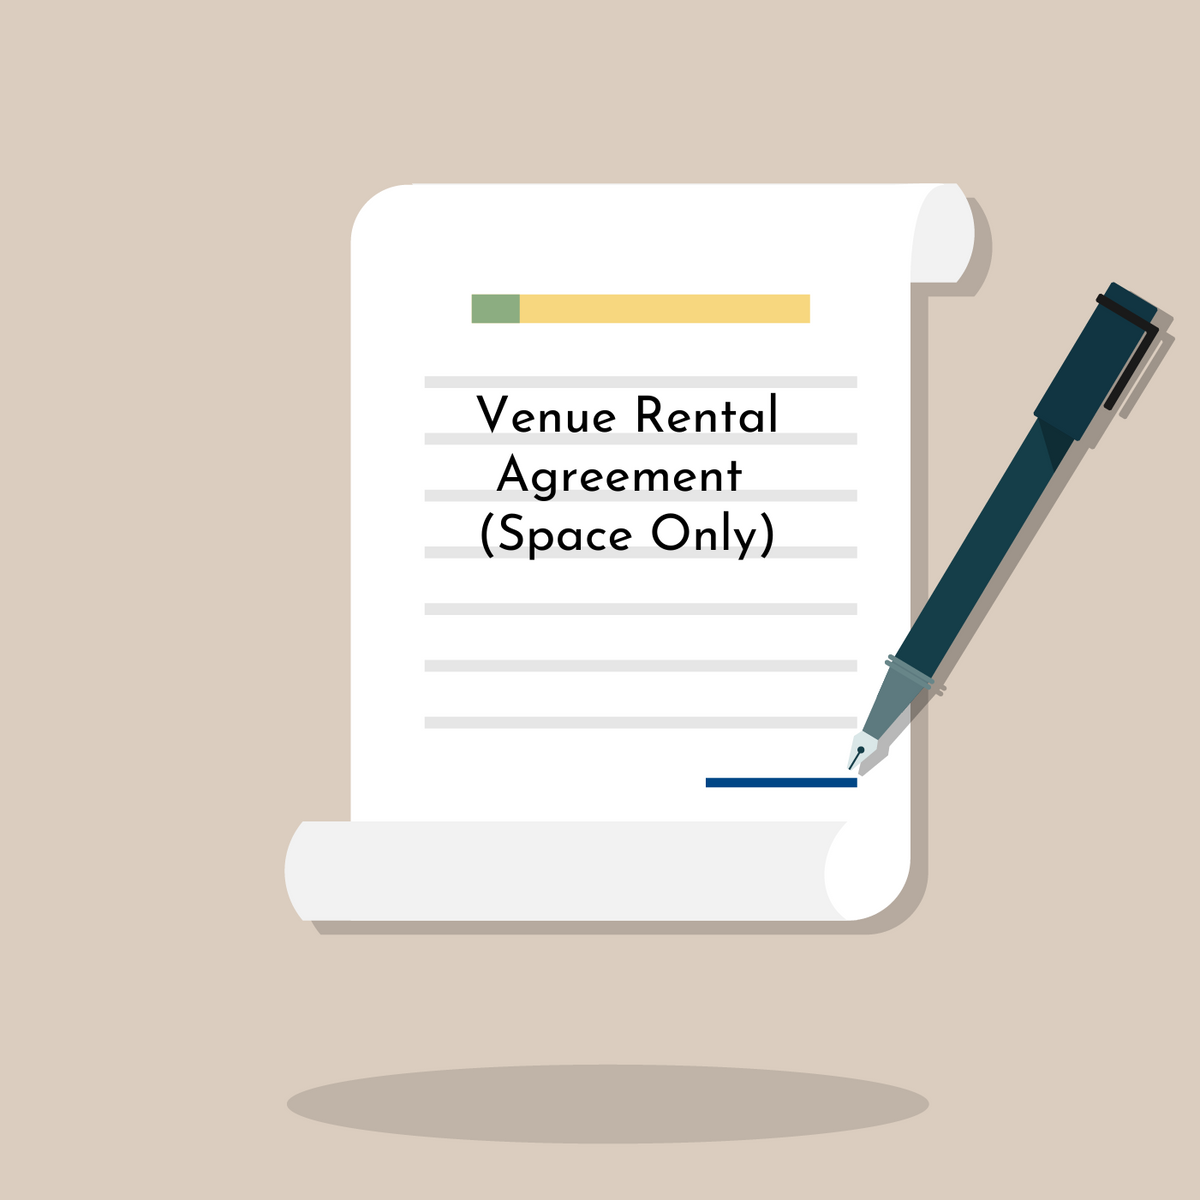 Venue Rental Agreement (Space Only)